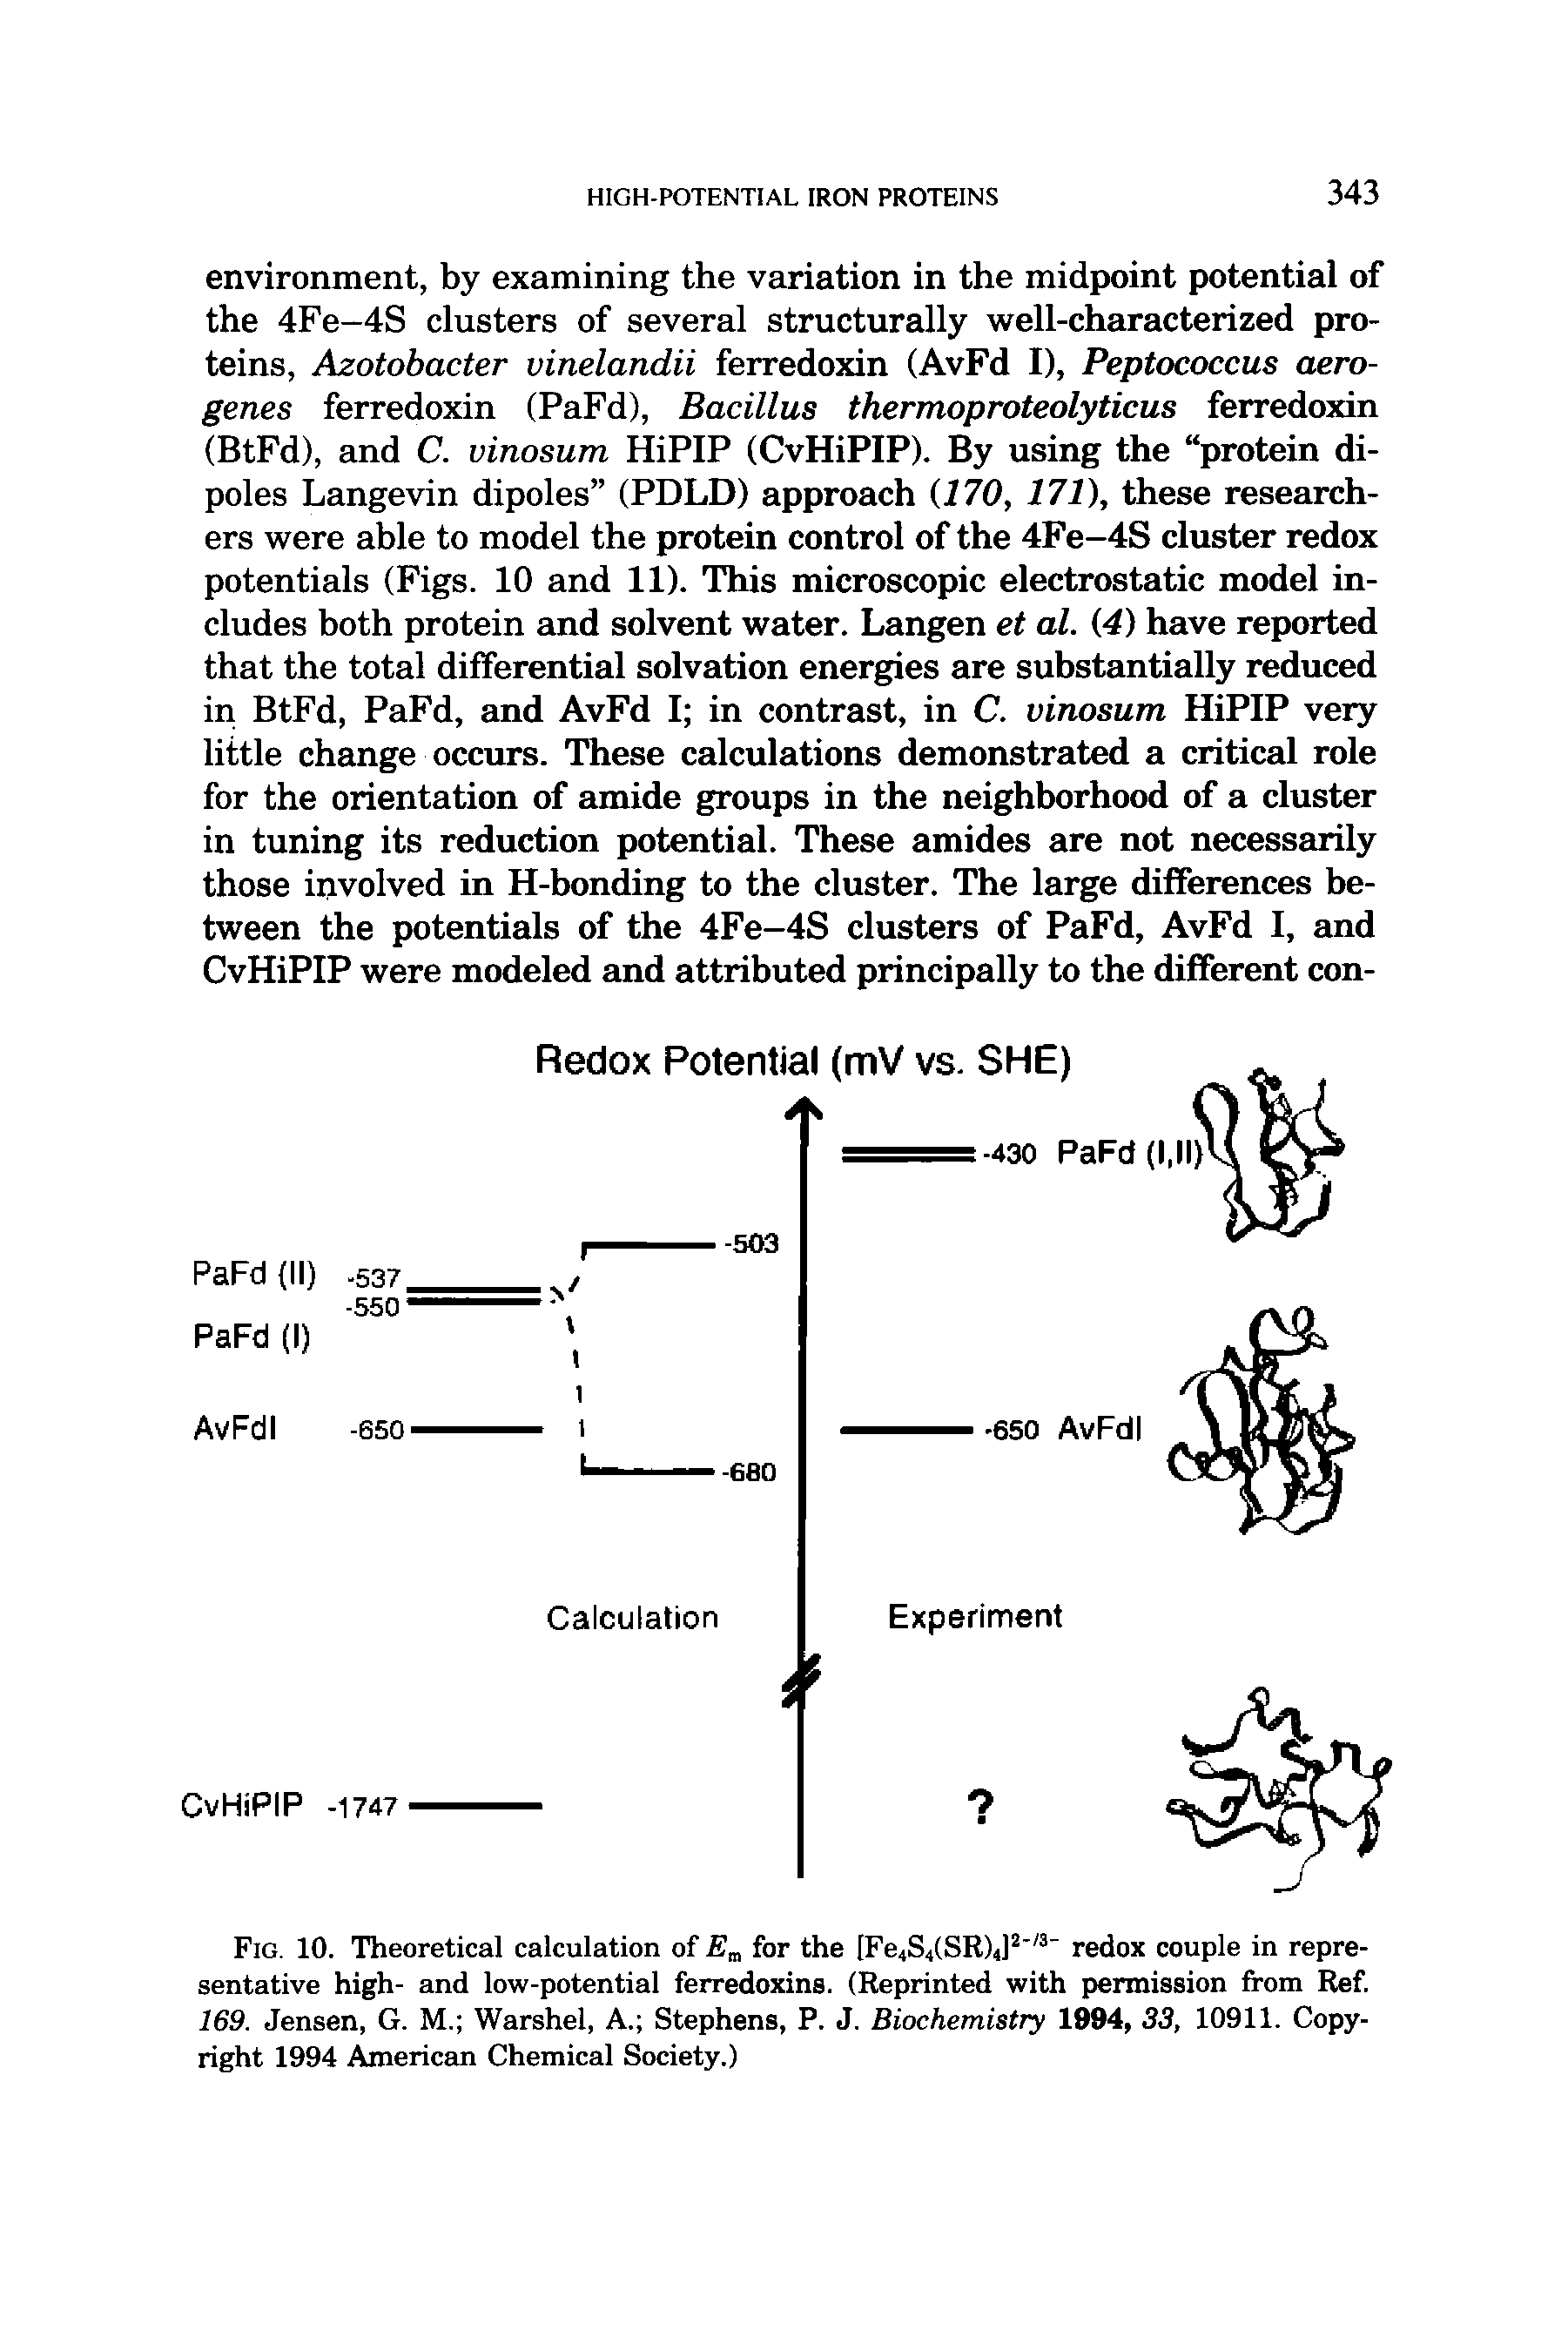 Fig. 10. Theoretical calculation of for the [Fe4S4(SR)4] redox couple in representative high- and low-potential ferredoxins. (Reprinted with permission from Ref. 169. Jensen, G. M. Warshel, A. Stephens, P. J. Biochemistry 1994, 33, 10911. Copyright 1994 American Chemical Society.)...